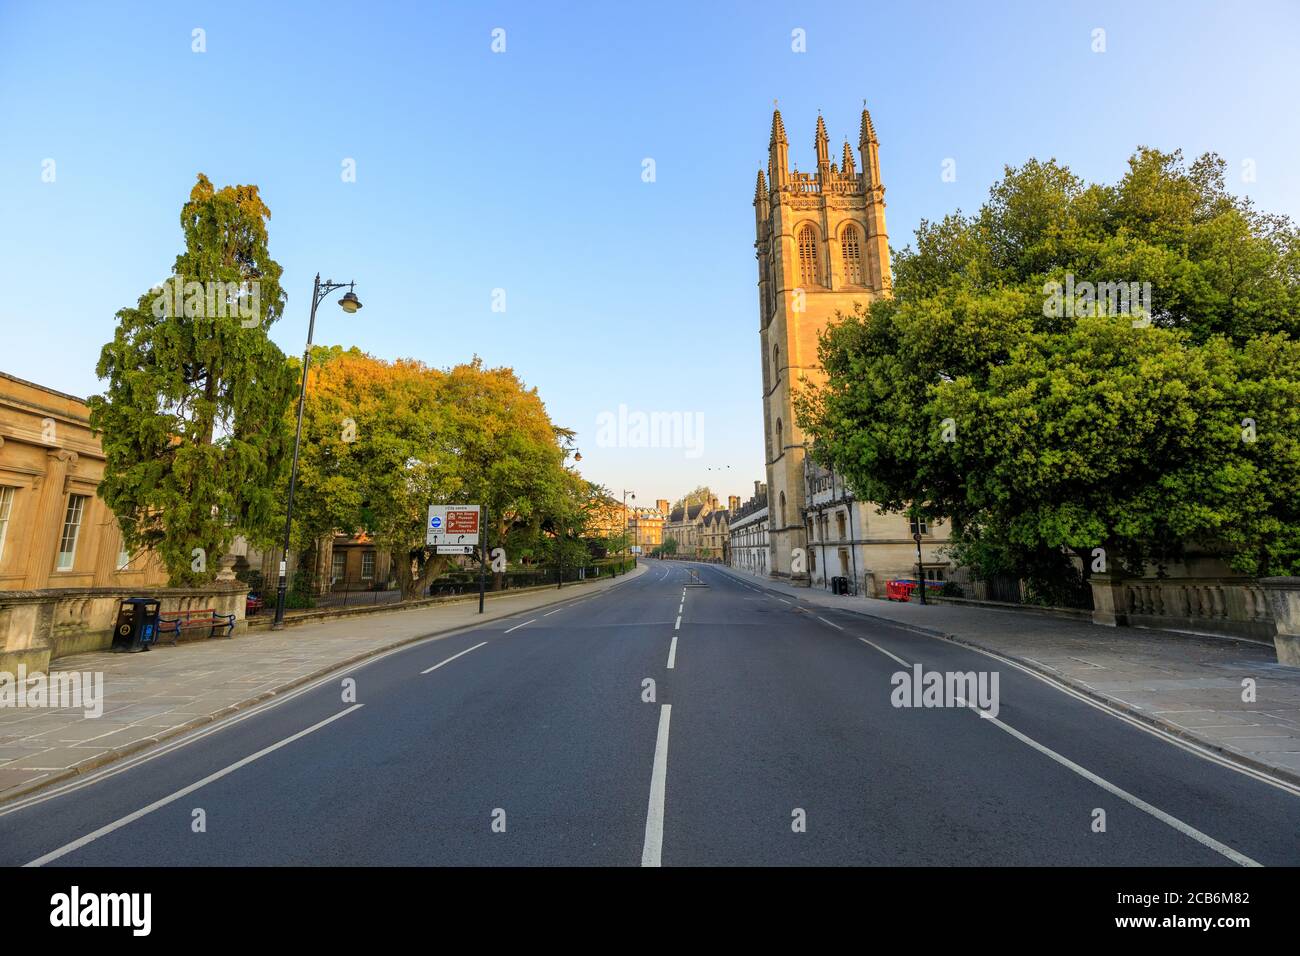 Magdalen Bridge and Magdalen Tower in Oxford at sunrise with no people around, early in the morning on a clear day with blue sky. Oxford, England, UK. Stock Photo